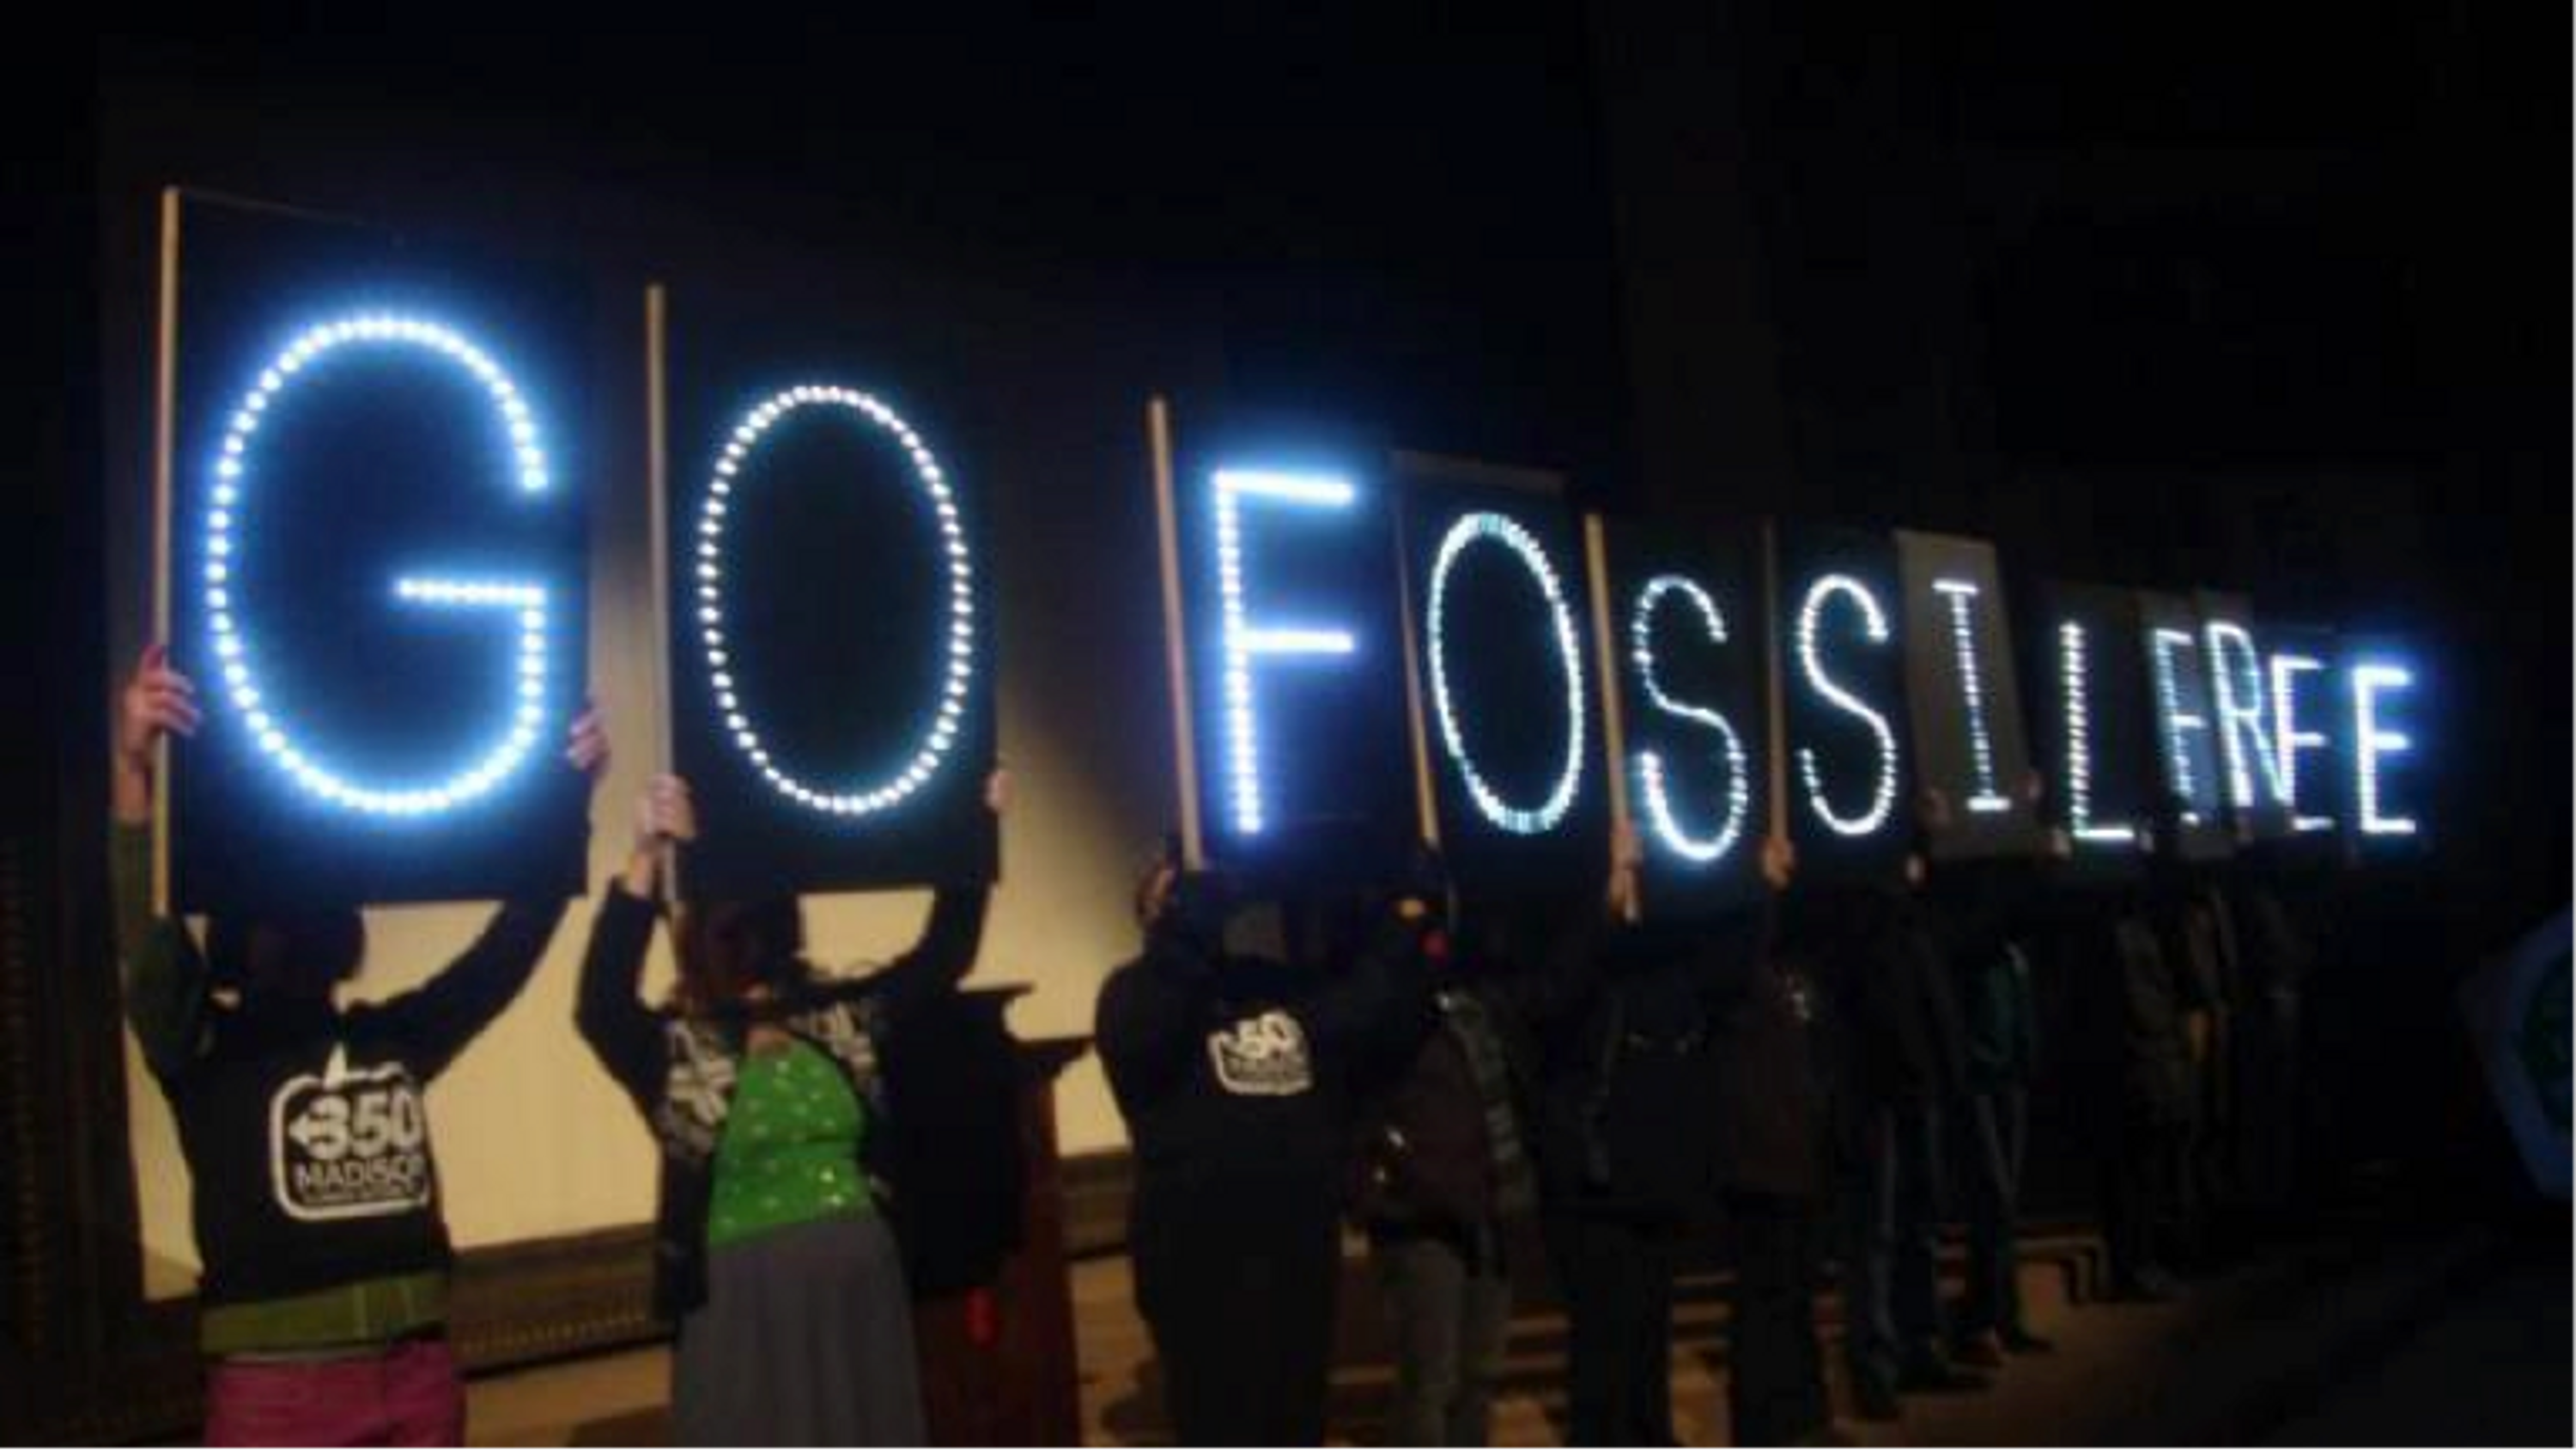 350 fossil free